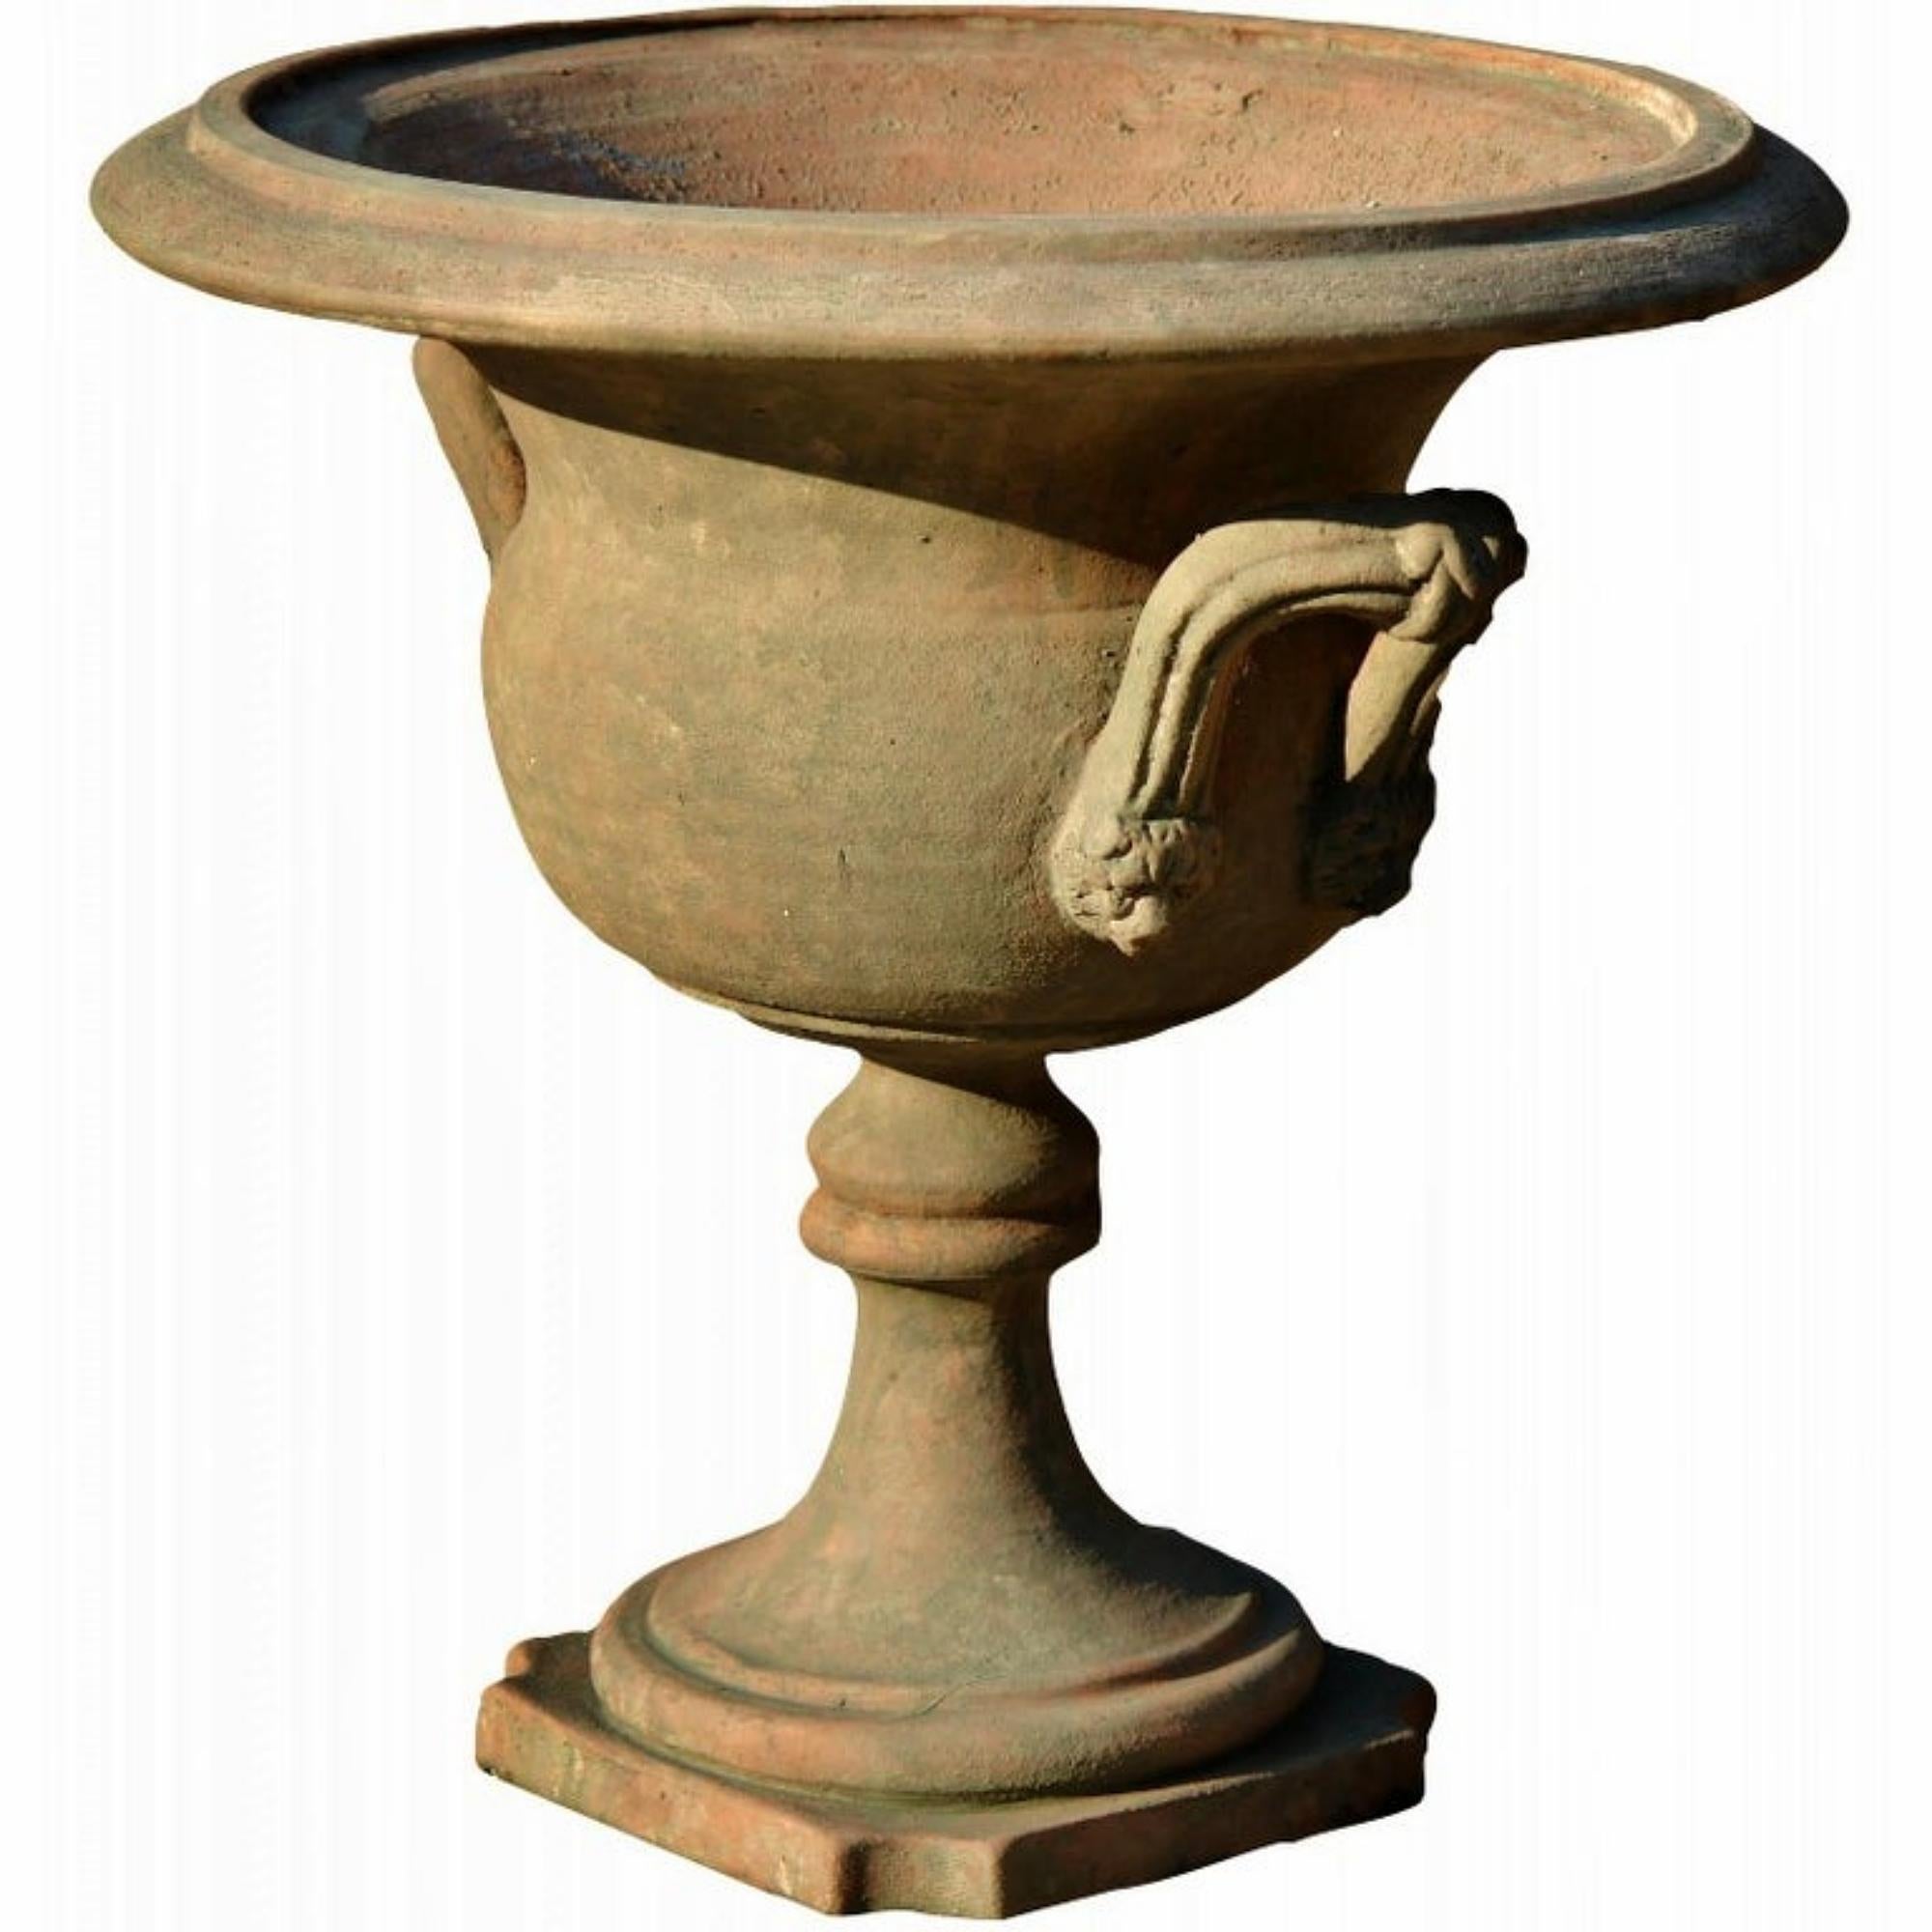 Pair of ornamental terracotta goblet with loop handles early 20th century.
Italy
Measures: height 38 cm.
weight 8 kg.
external diameter 38 cm.
Manufacturing made in Italy / Tuscany.
Material : terracotta.
Good conditions.